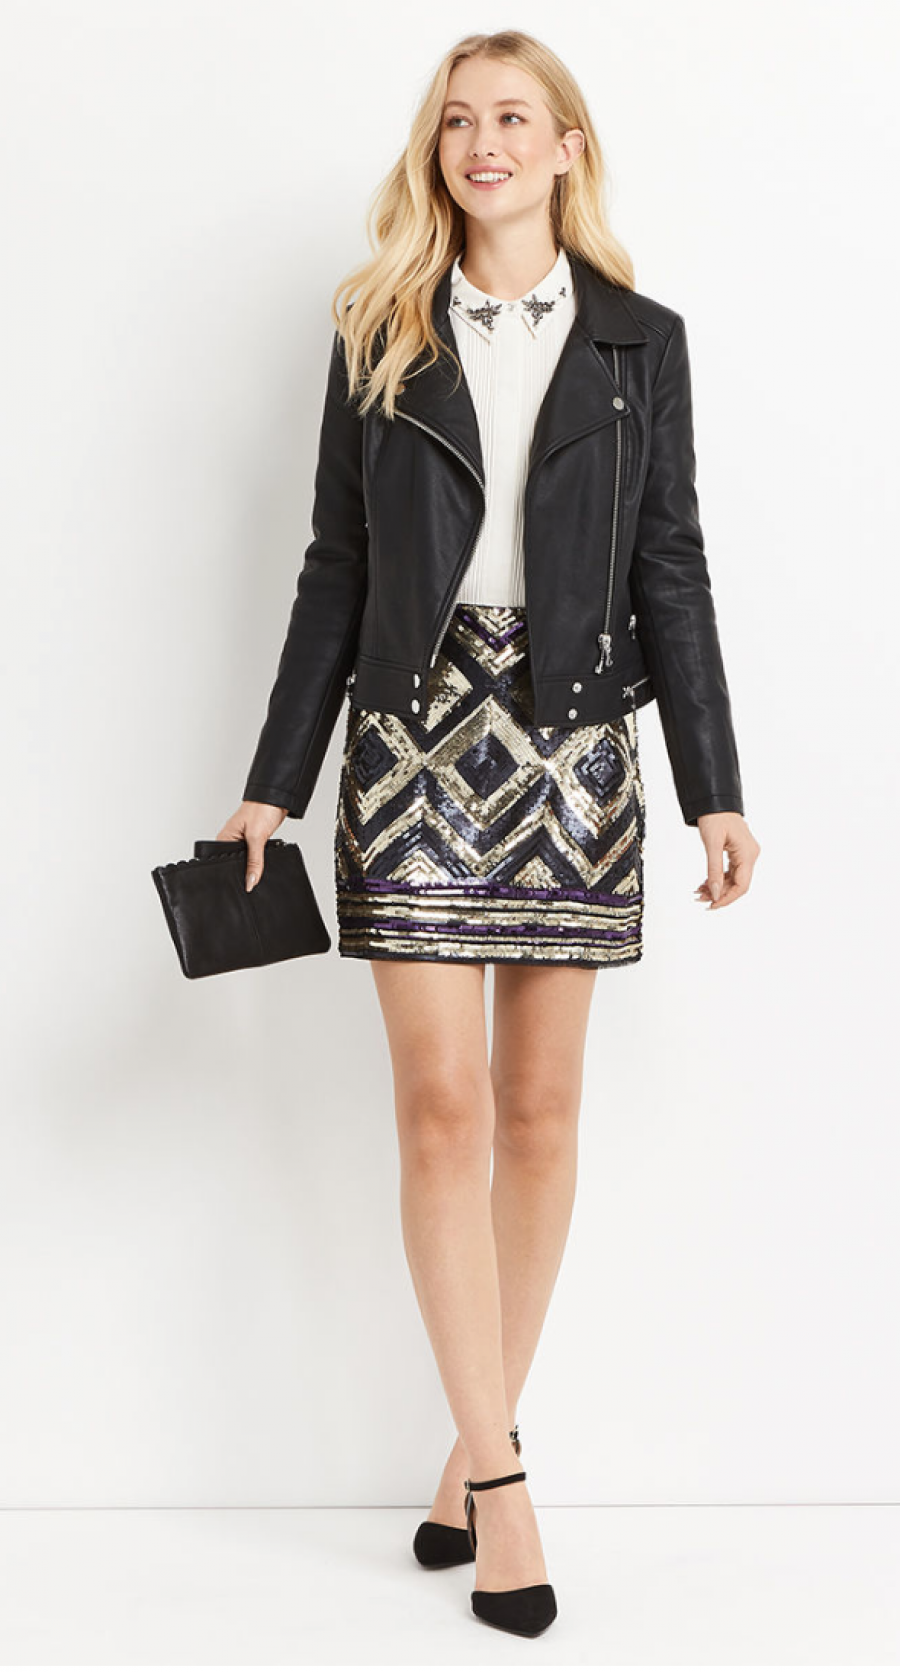 See Need Want Fashion Trend Sequinned Skirt Oasis